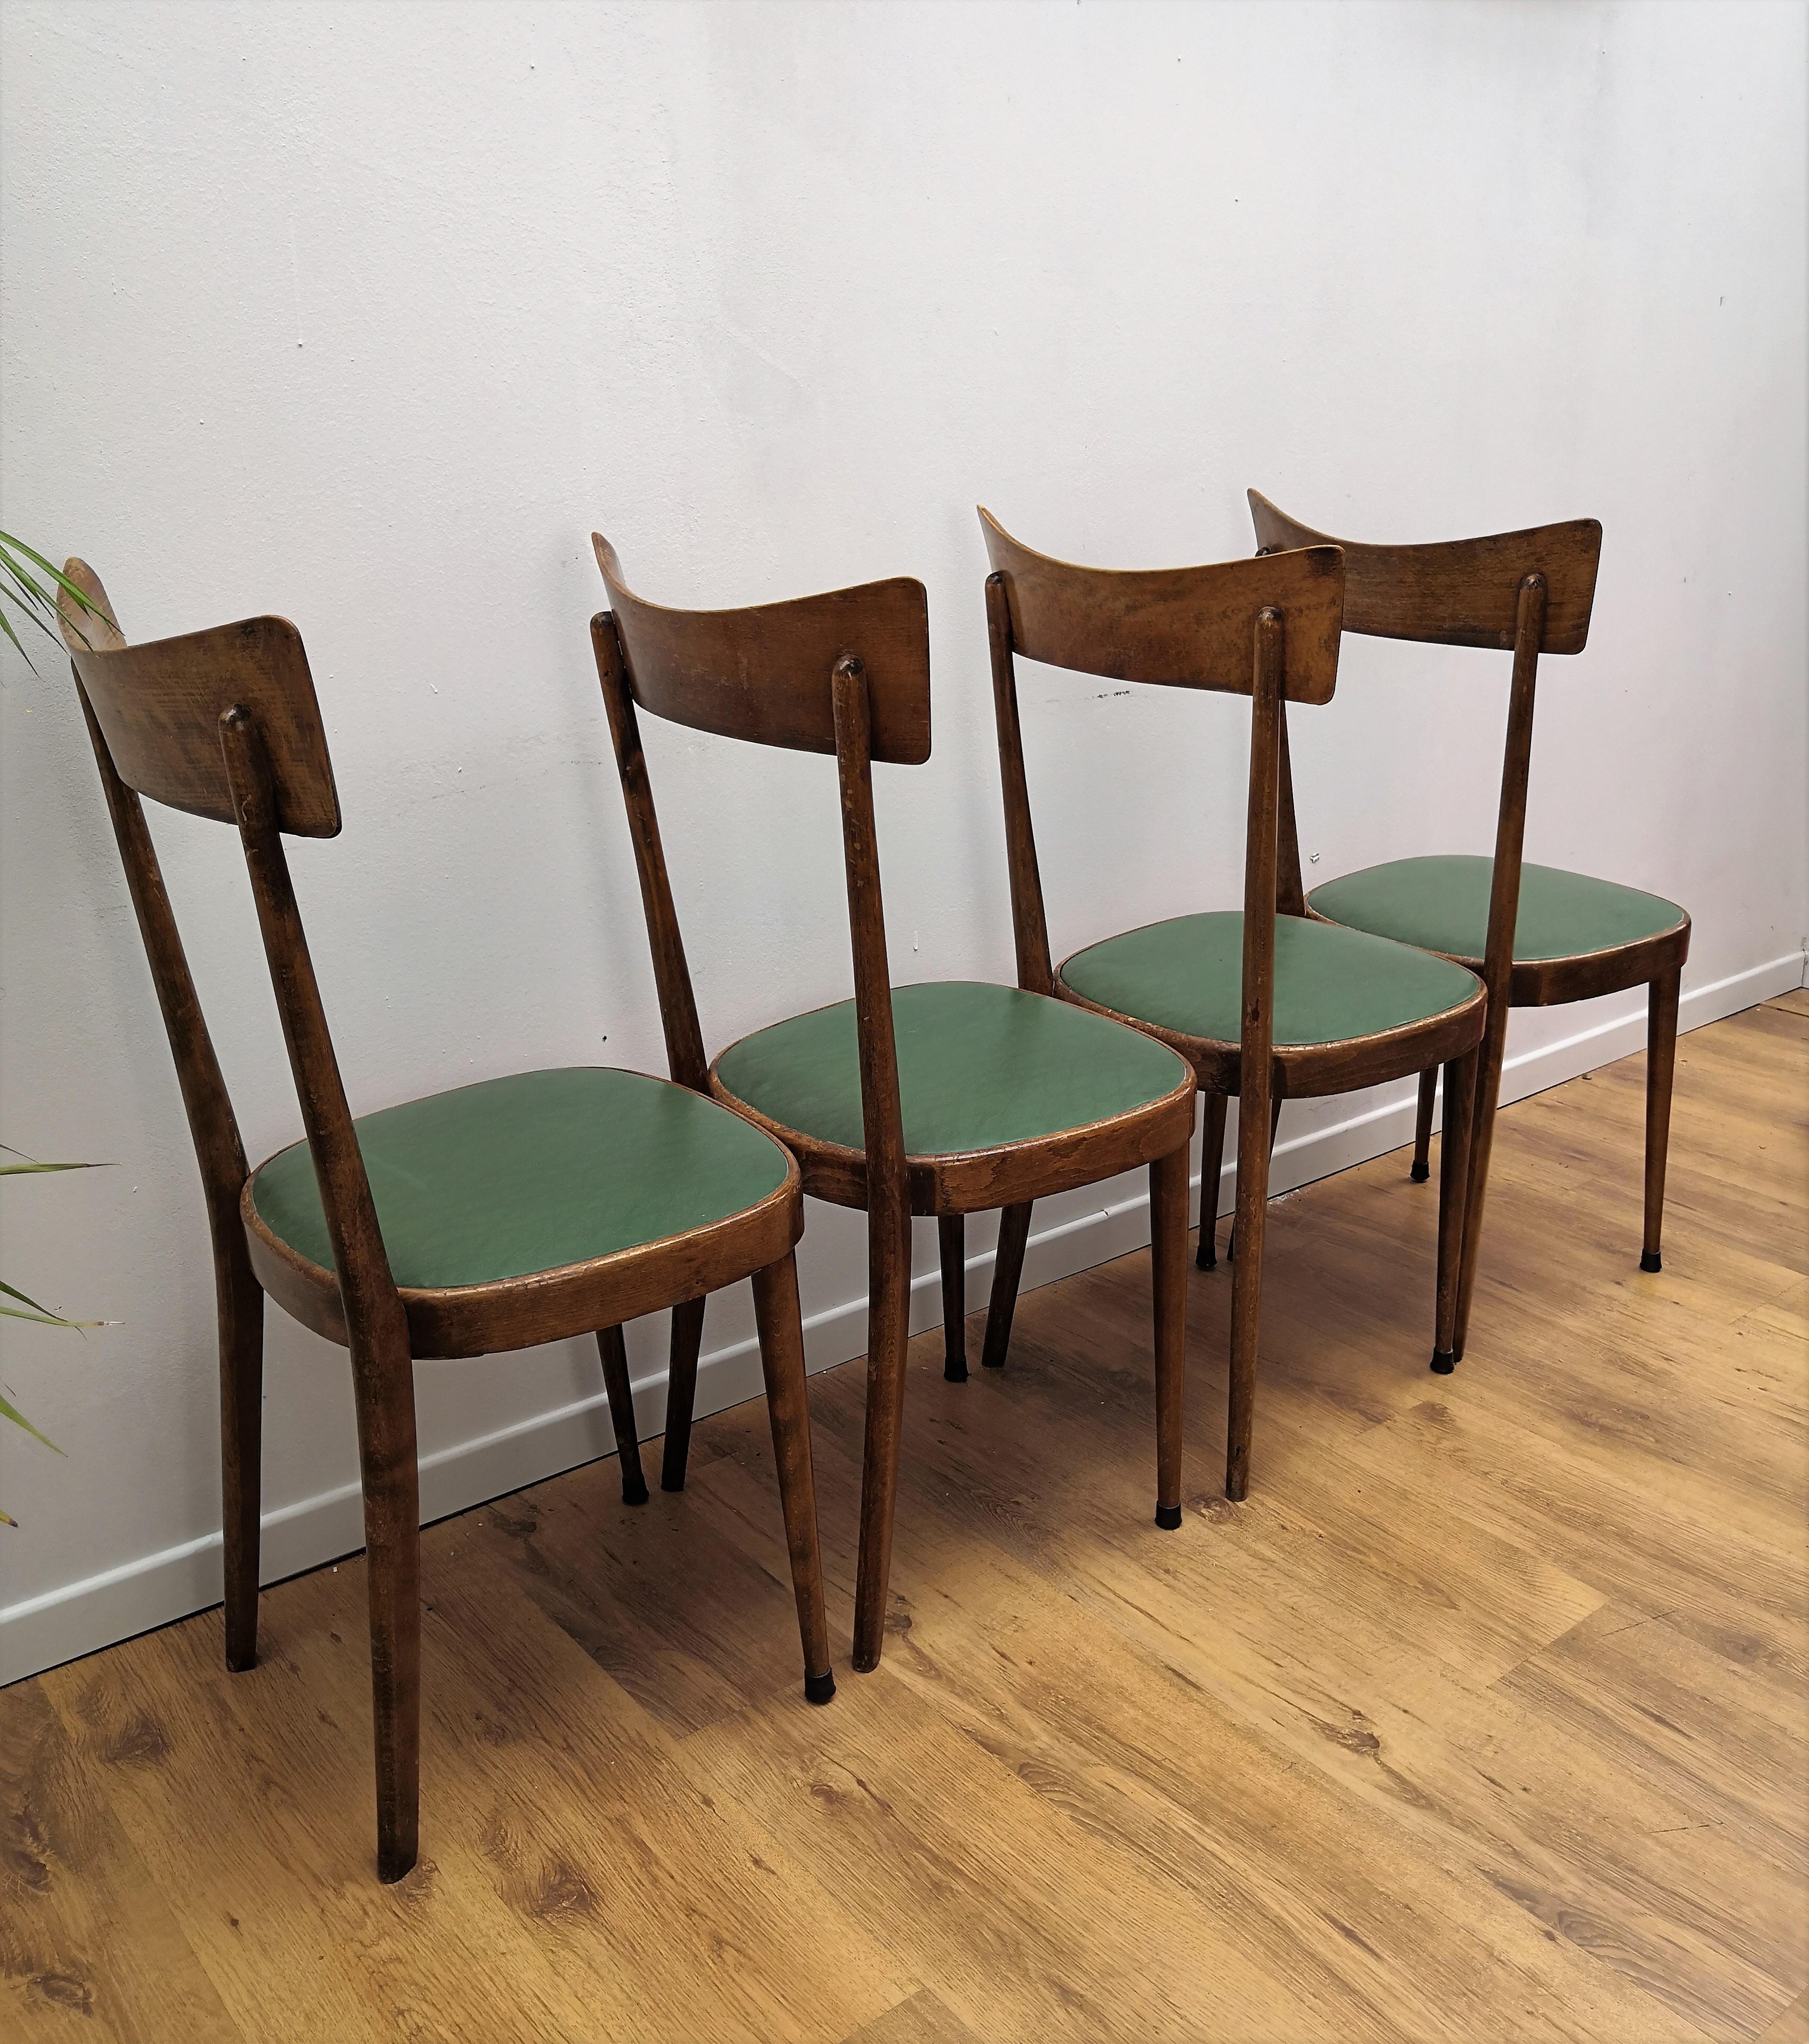 Wood Set of Four 1950s Italian Mid-Century Modern Dining Room Chairs